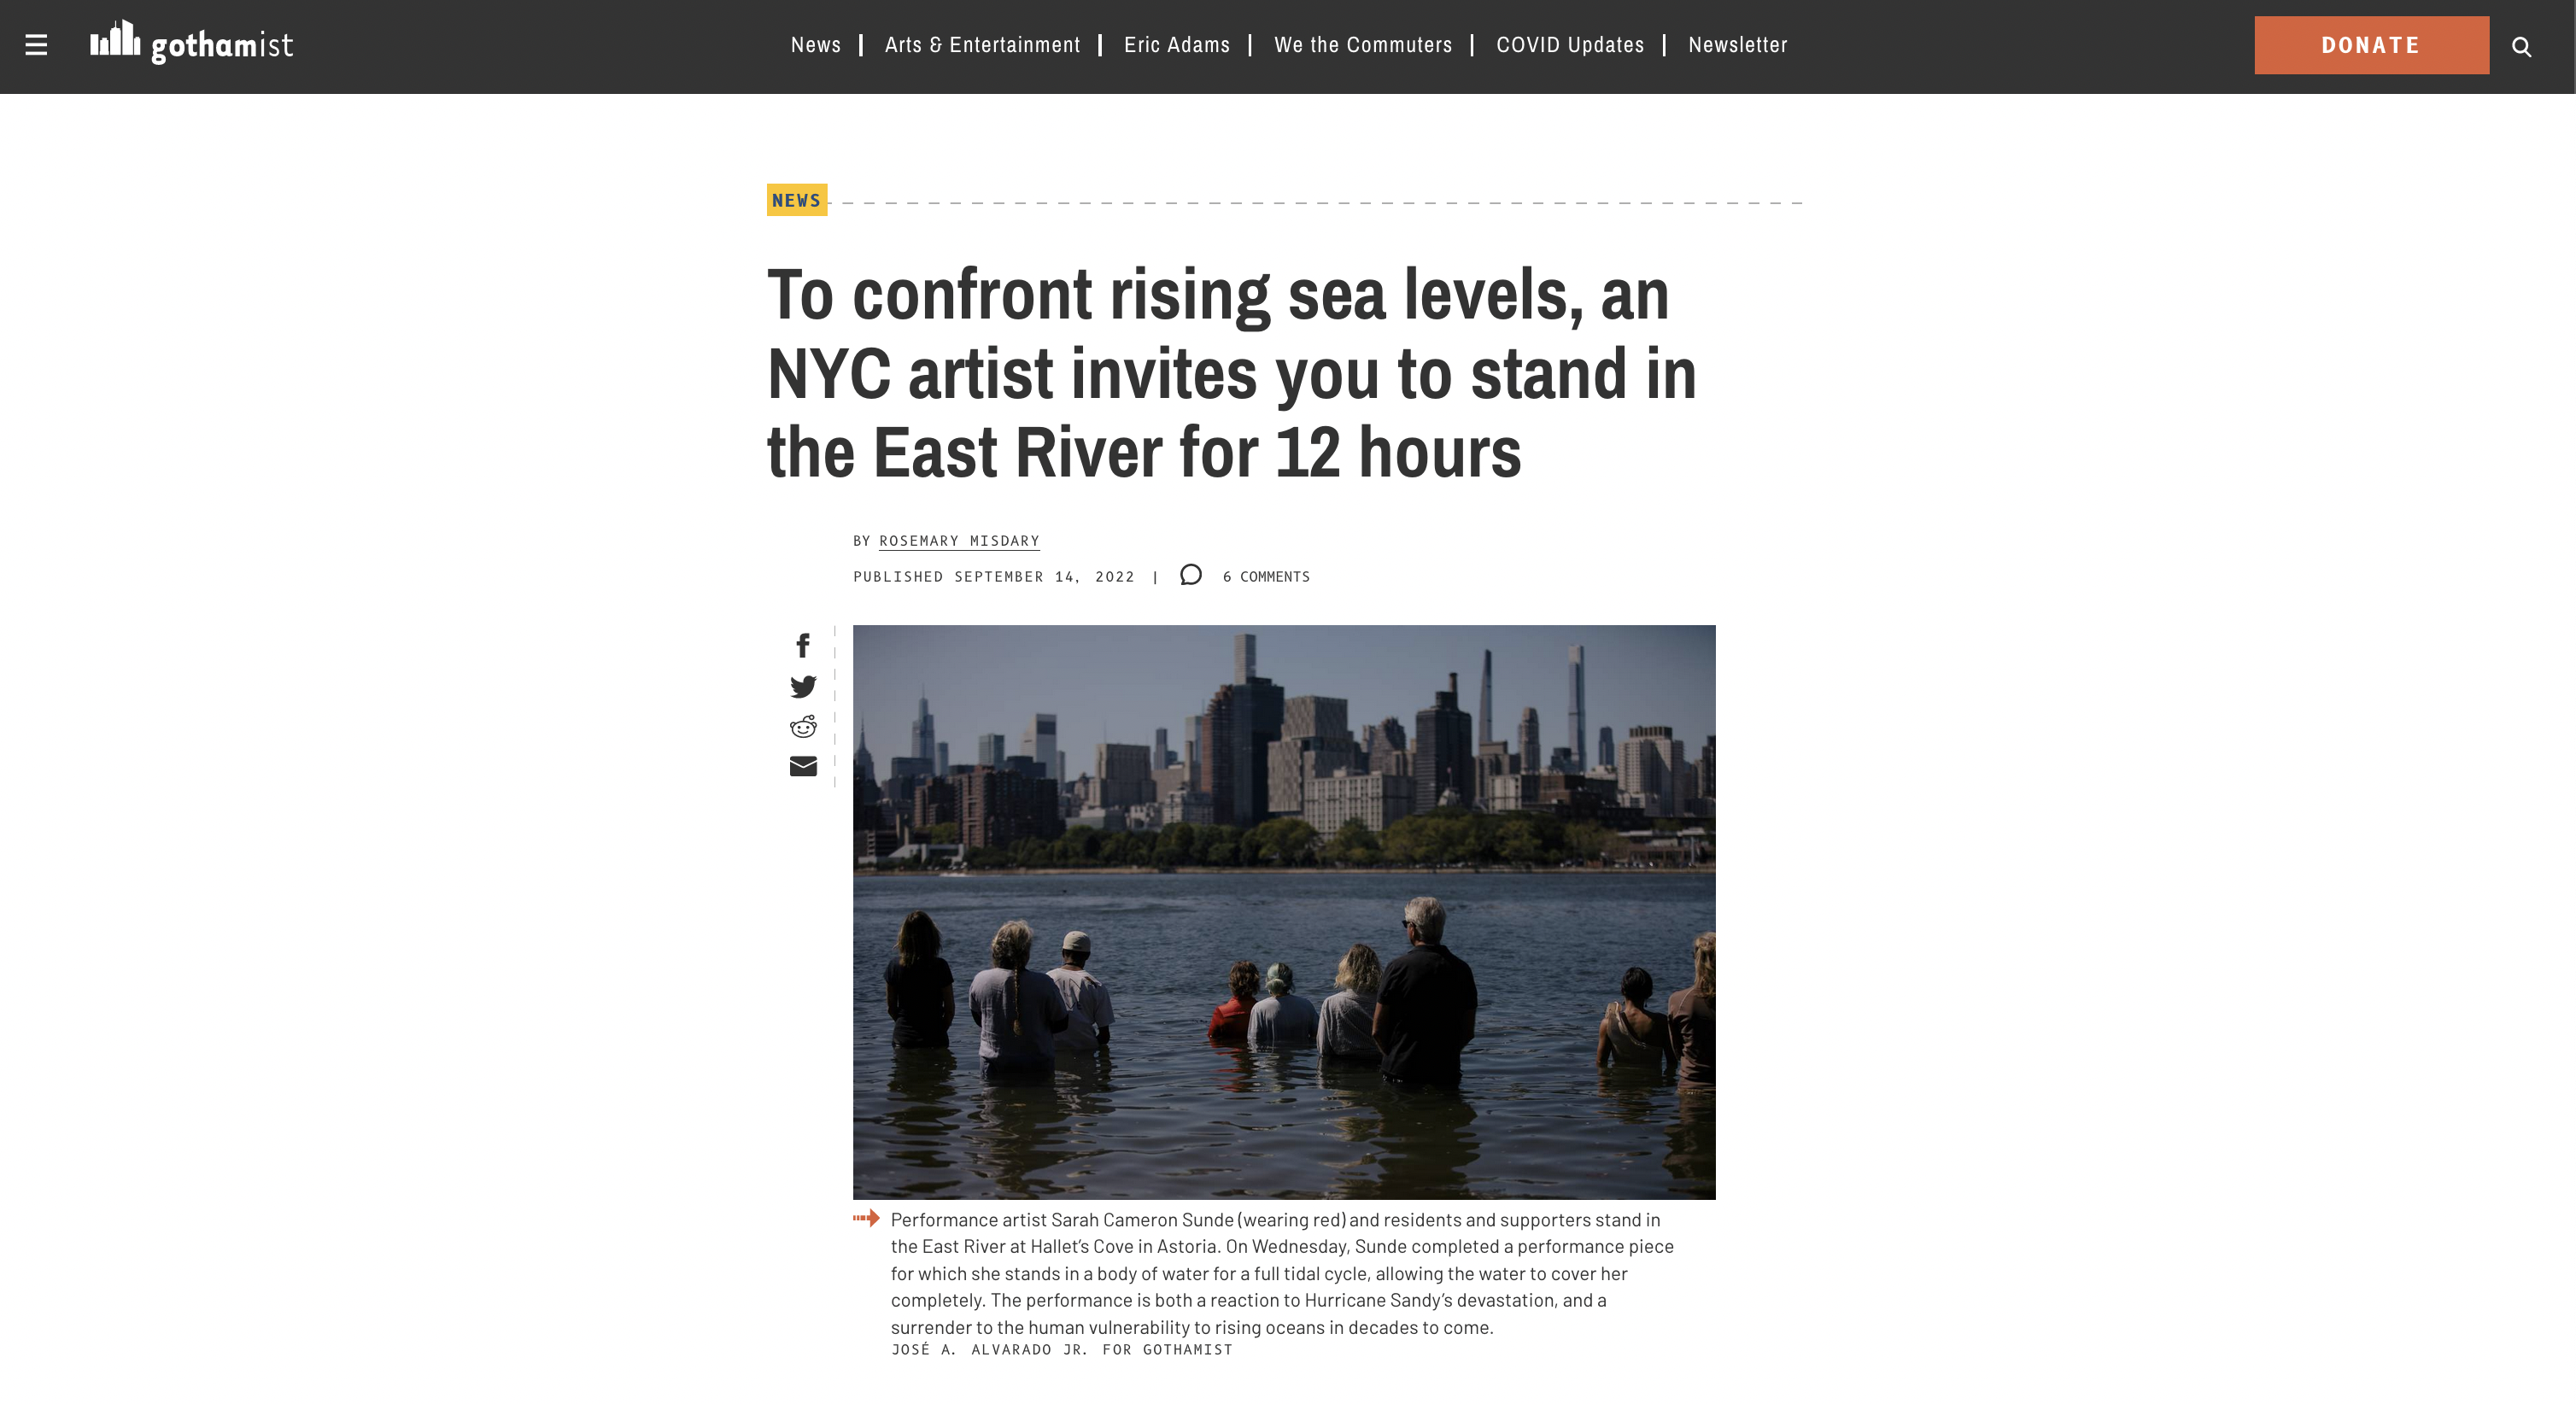 for Gothamist: To confront rising sea levels, an NYC artist invites you to stand in the East River for 12 hours